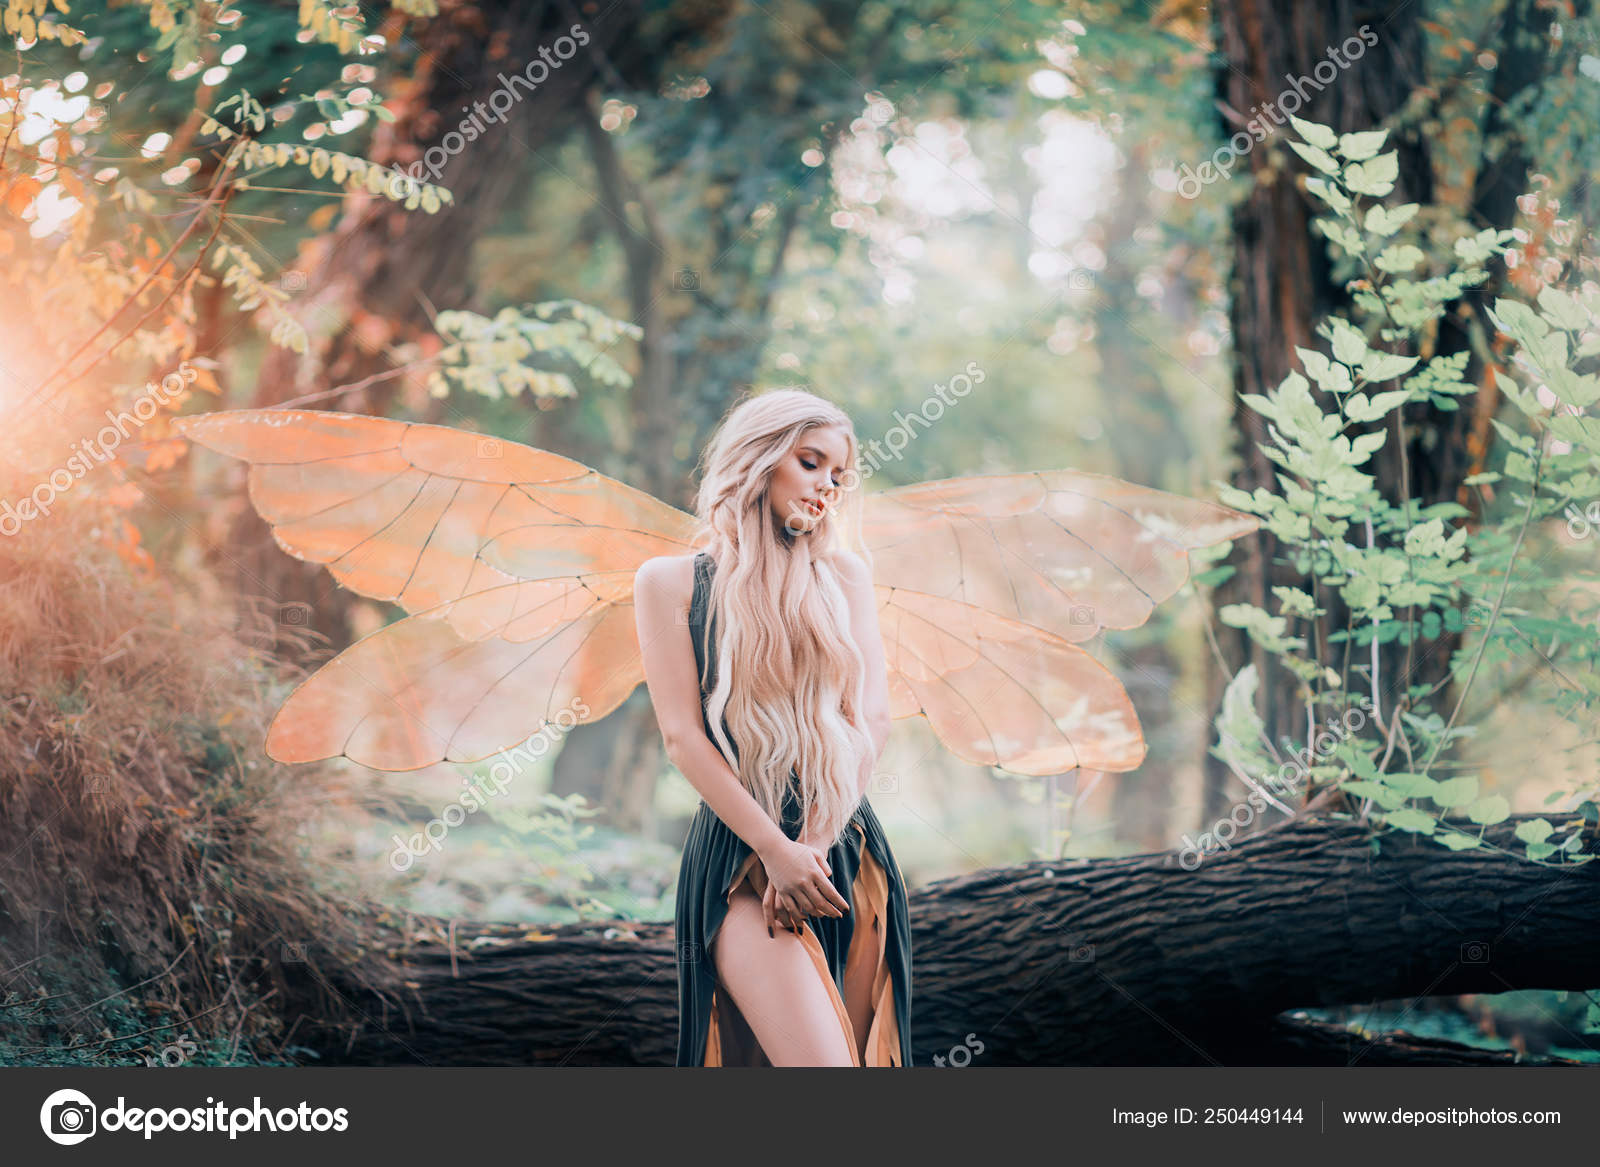 Real fairy from magical stories, goddess of nature with transparent ...